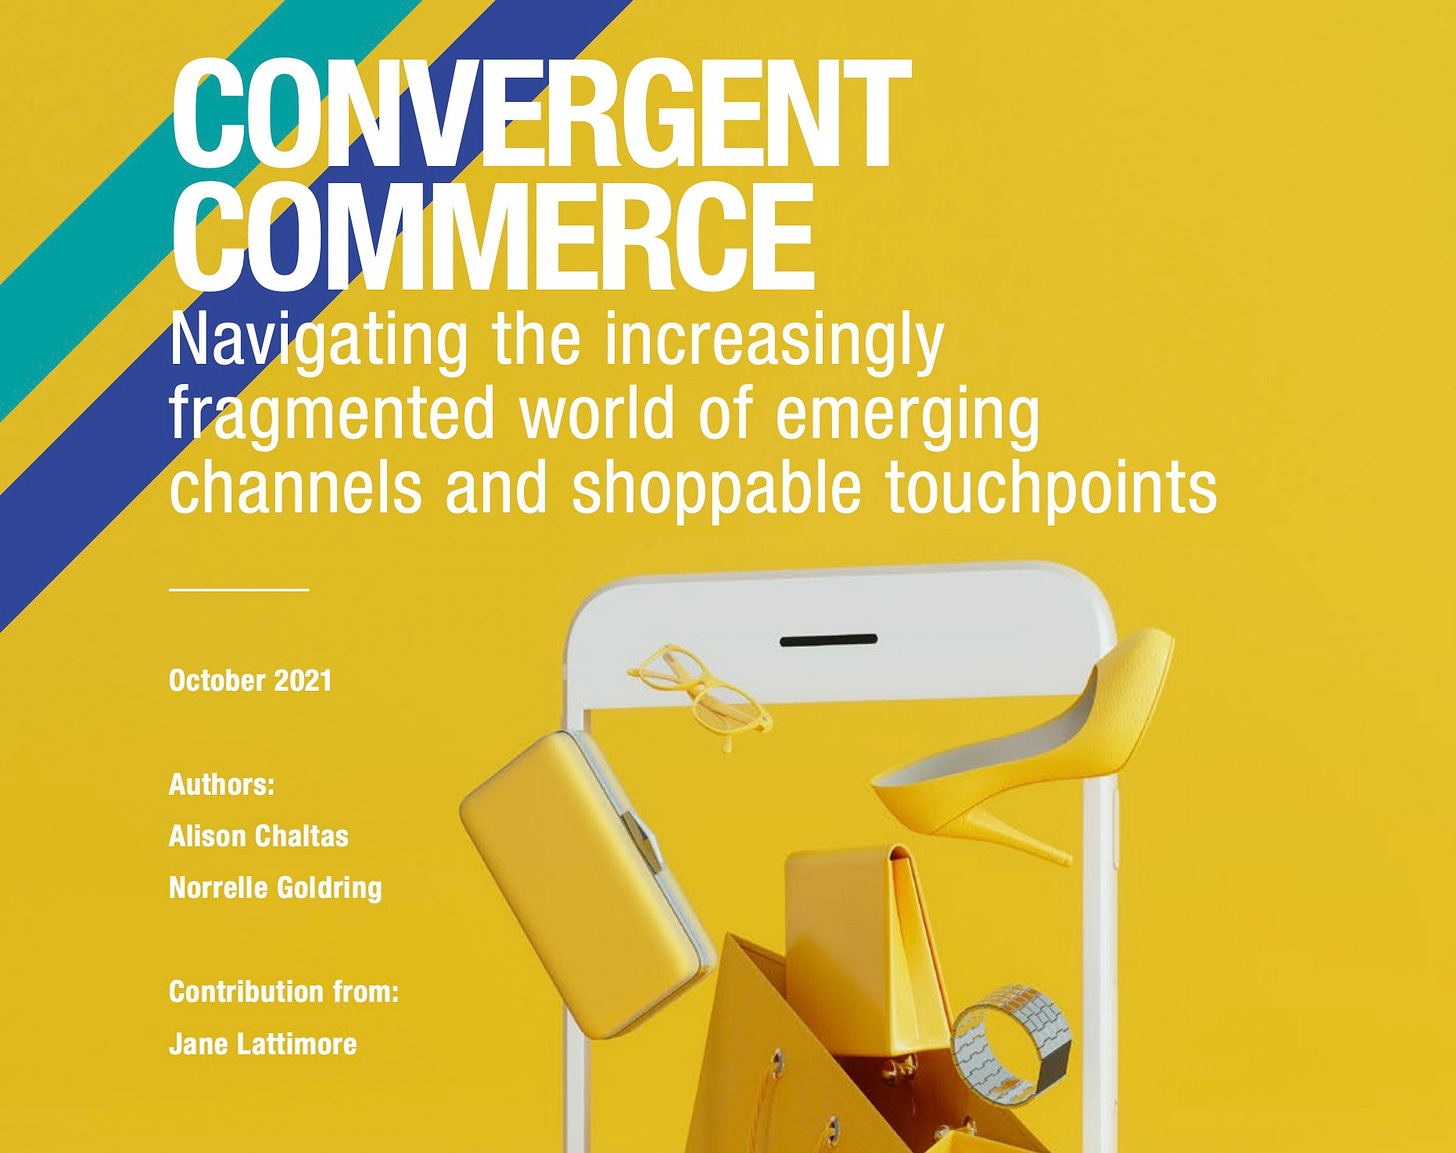 May be an image of text that says 'CONVERGENT COMMERCE Navigating Navig the increasingly fragmented world of emerging channels and shoppable touchpoints October 2021 Authors: Alison Alio Chaltas Norrelle Goldring Contribution from: Jane Lattimore'